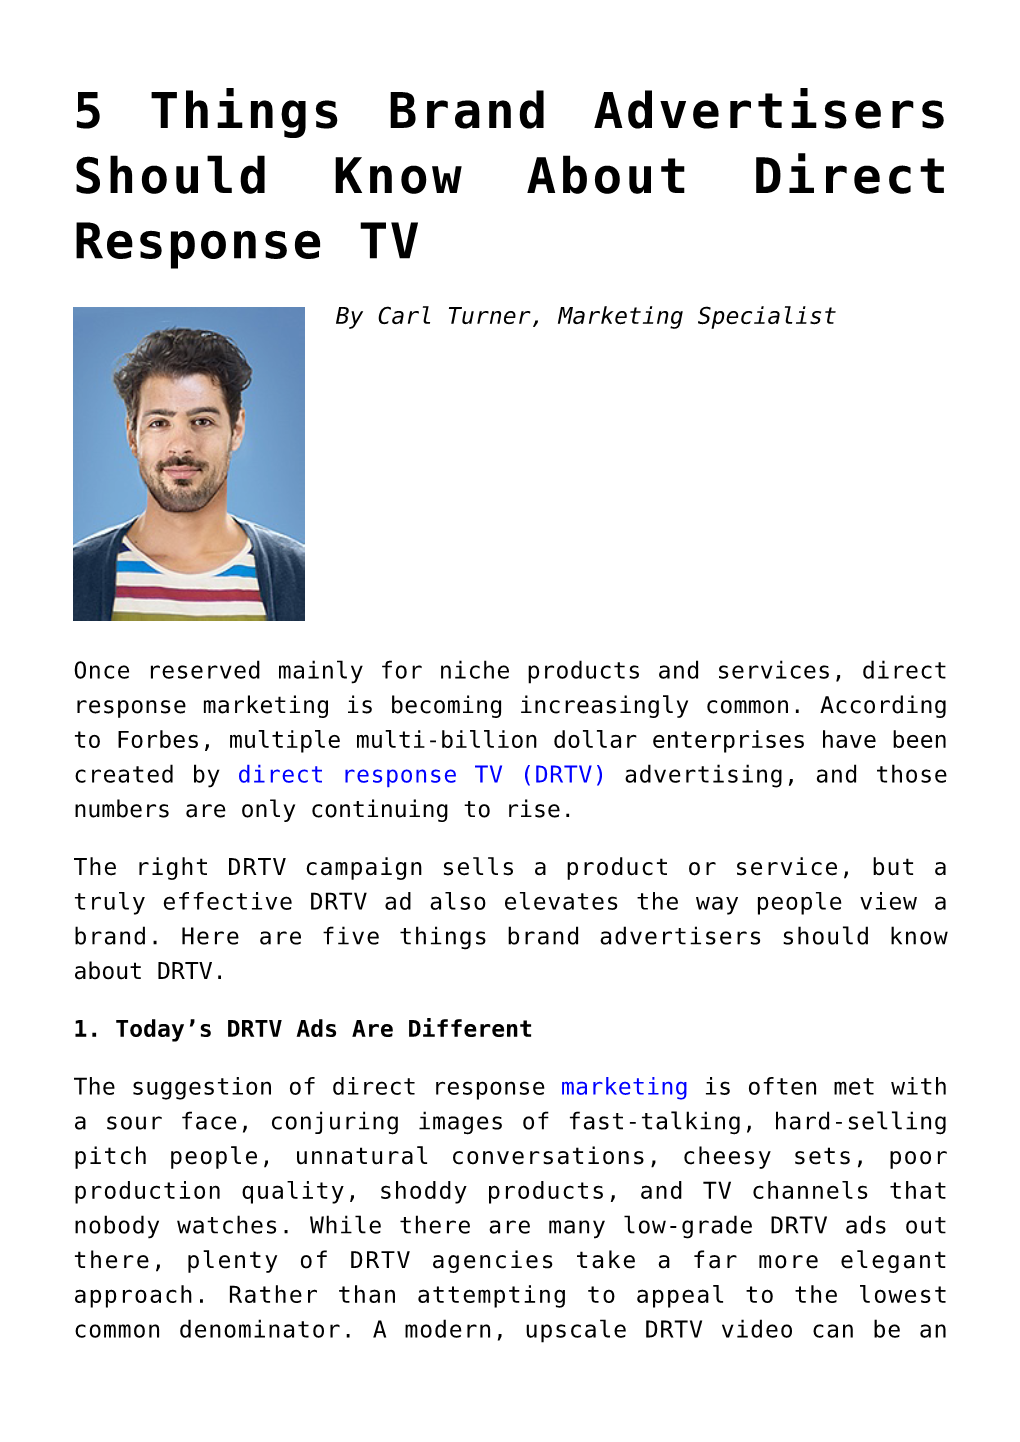 5 Things Brand Advertisers Should Know About Direct Response TV